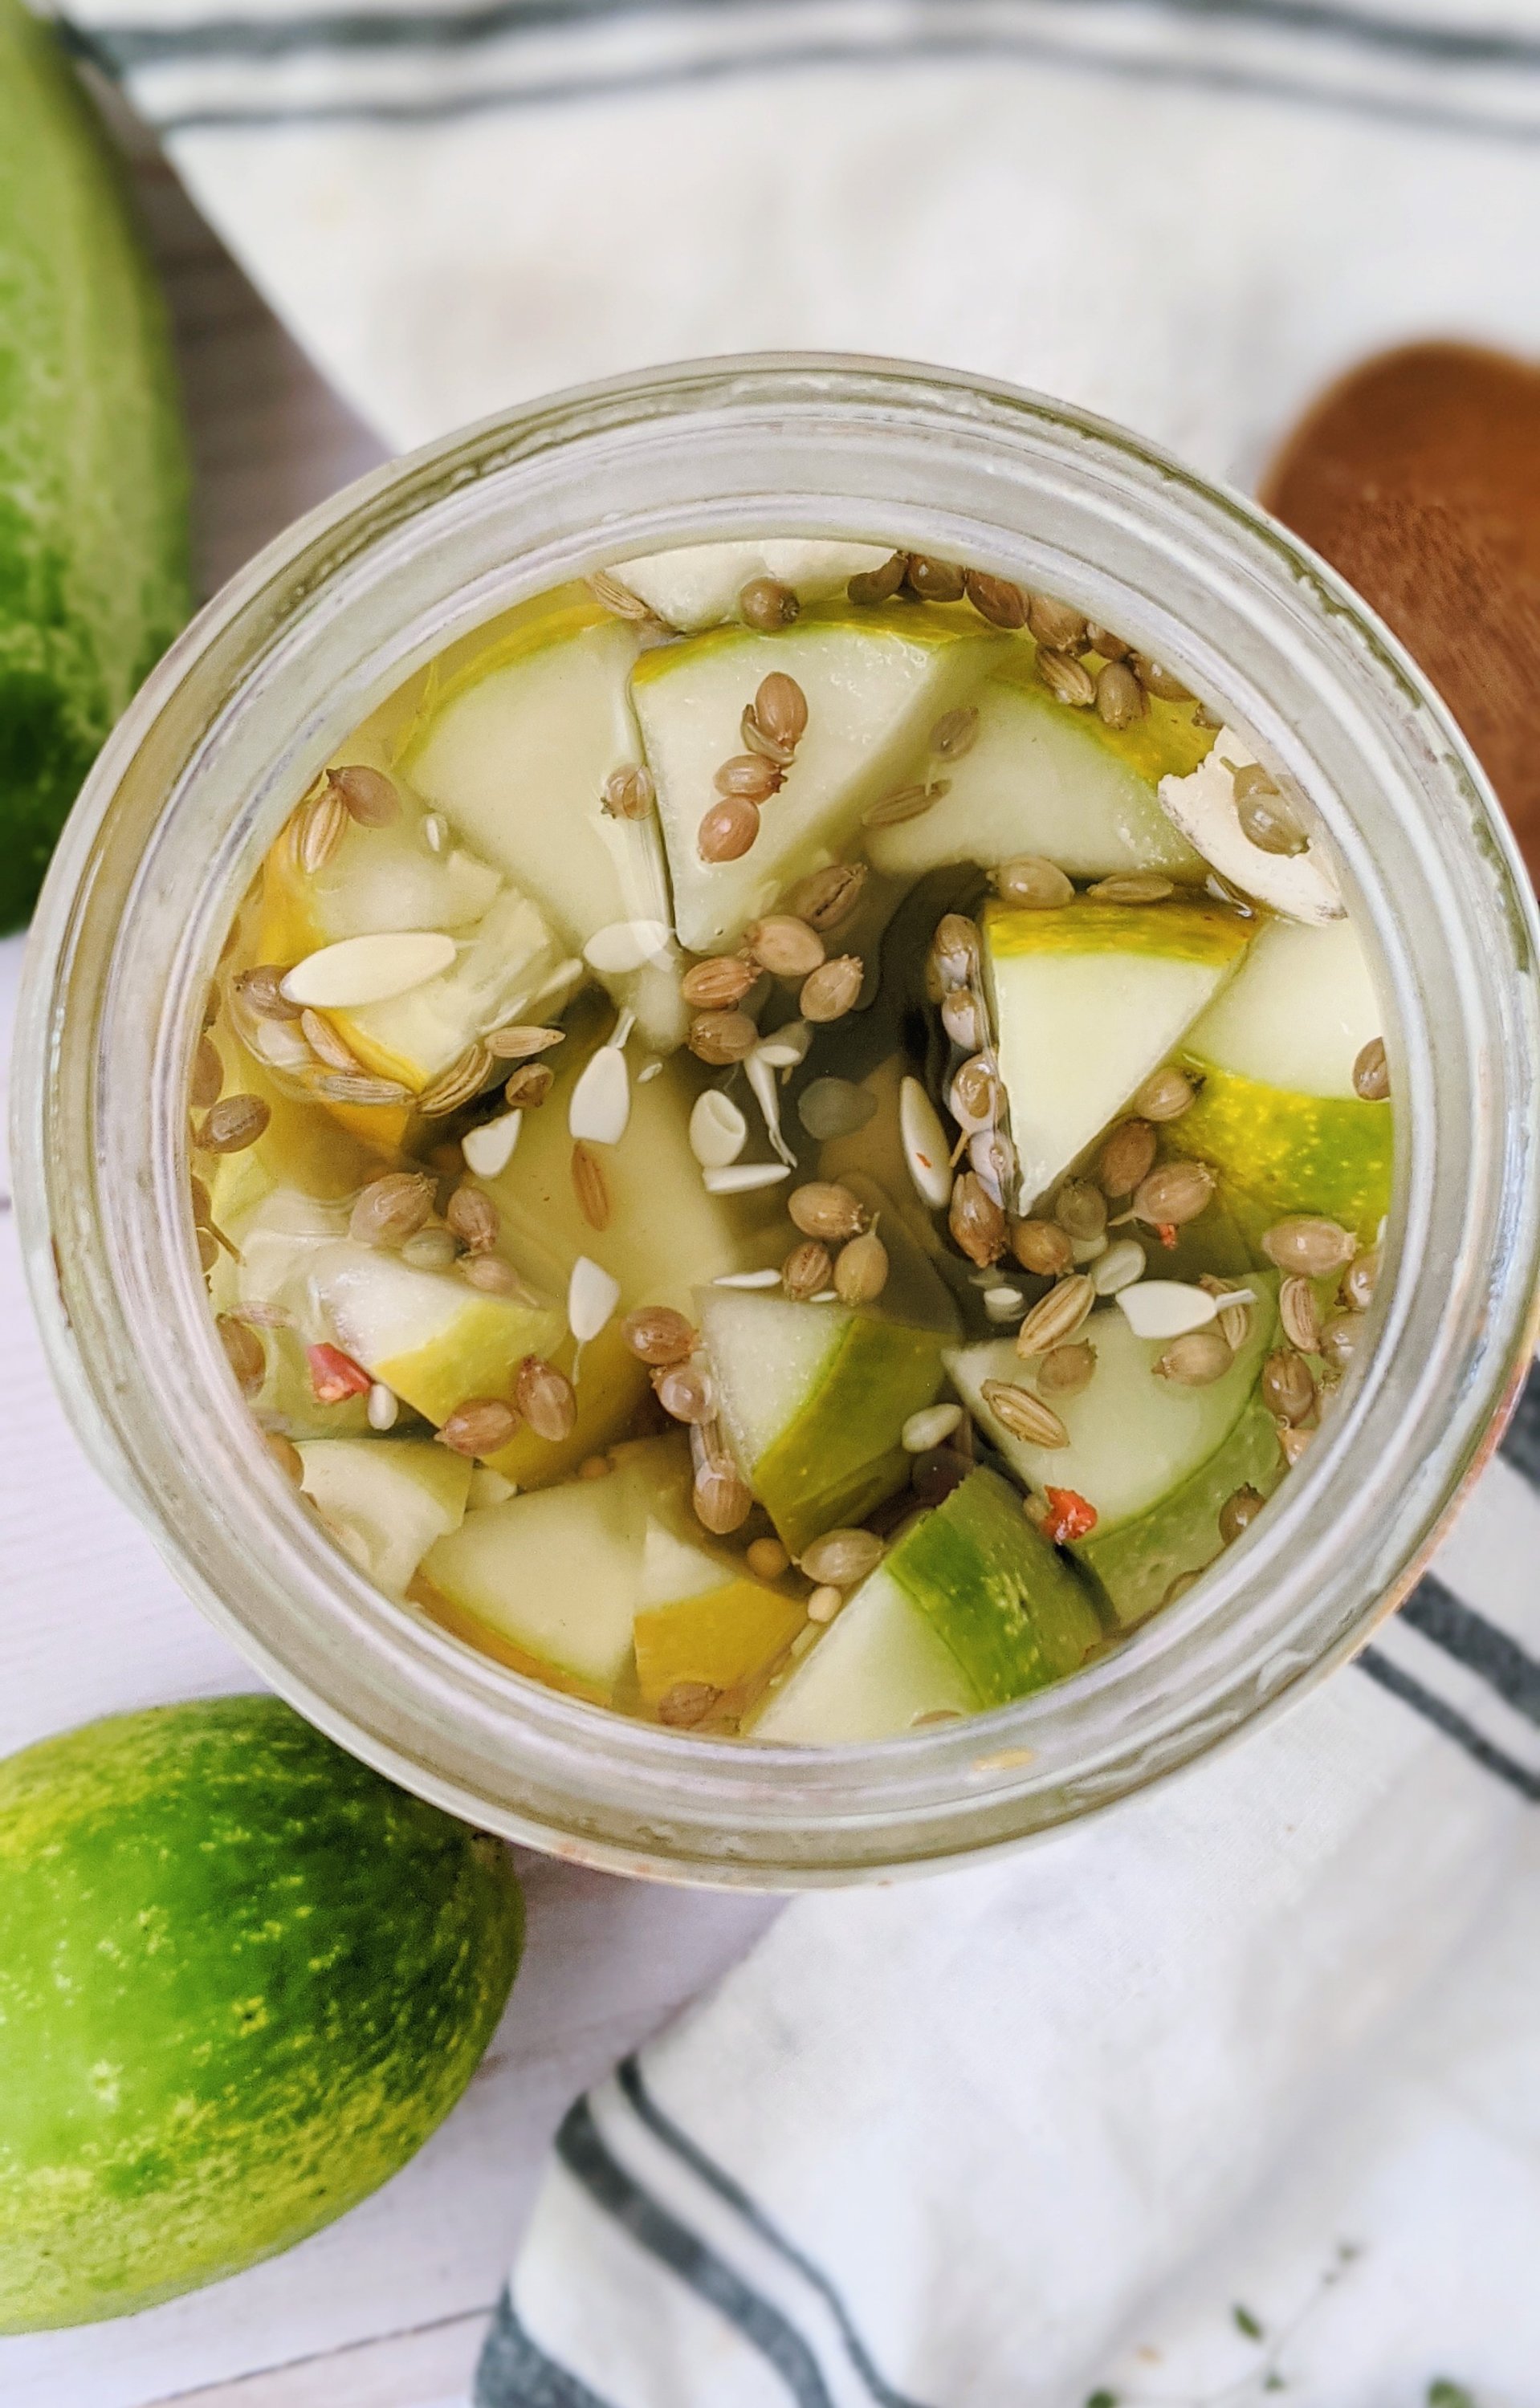 refrigerator garlic pickles with out dill can you make pickles with no dill sour pickles with vinegar and sugar and garlic and spices